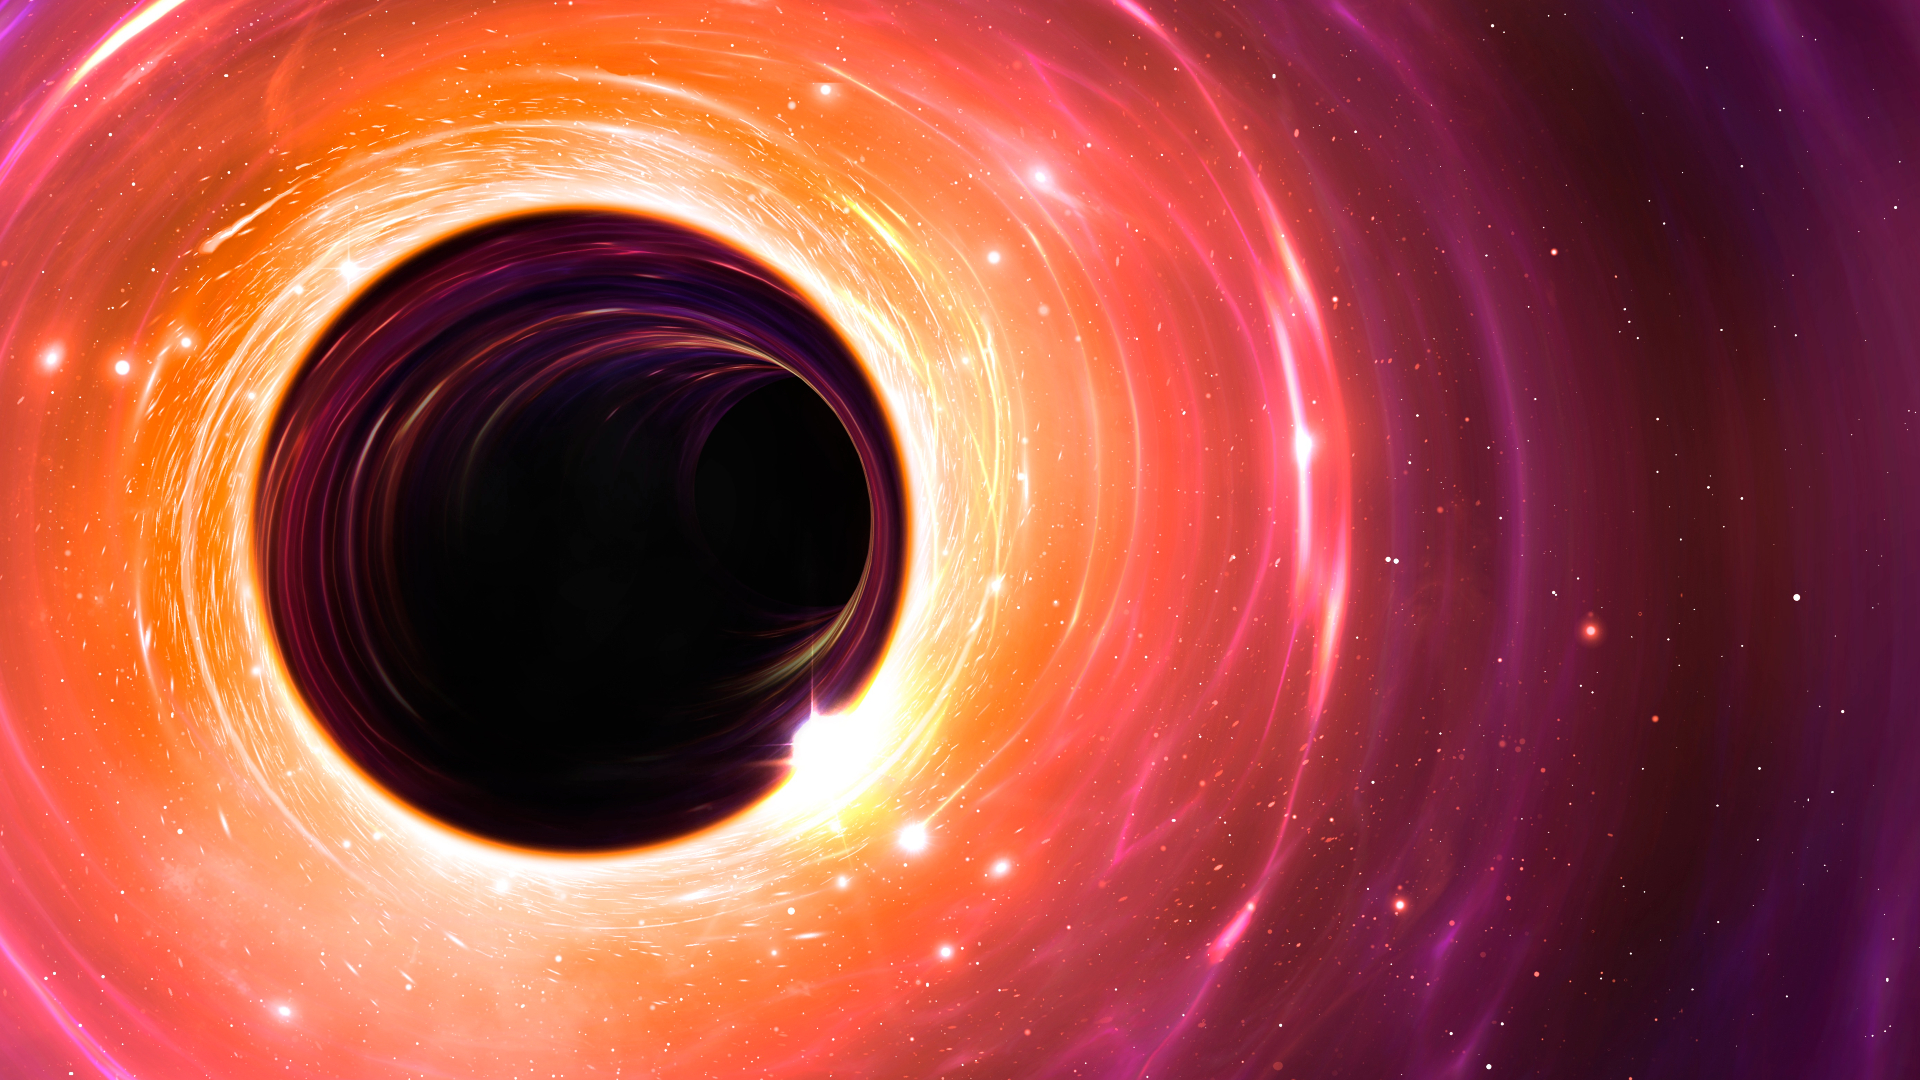 aliein a black hole eating